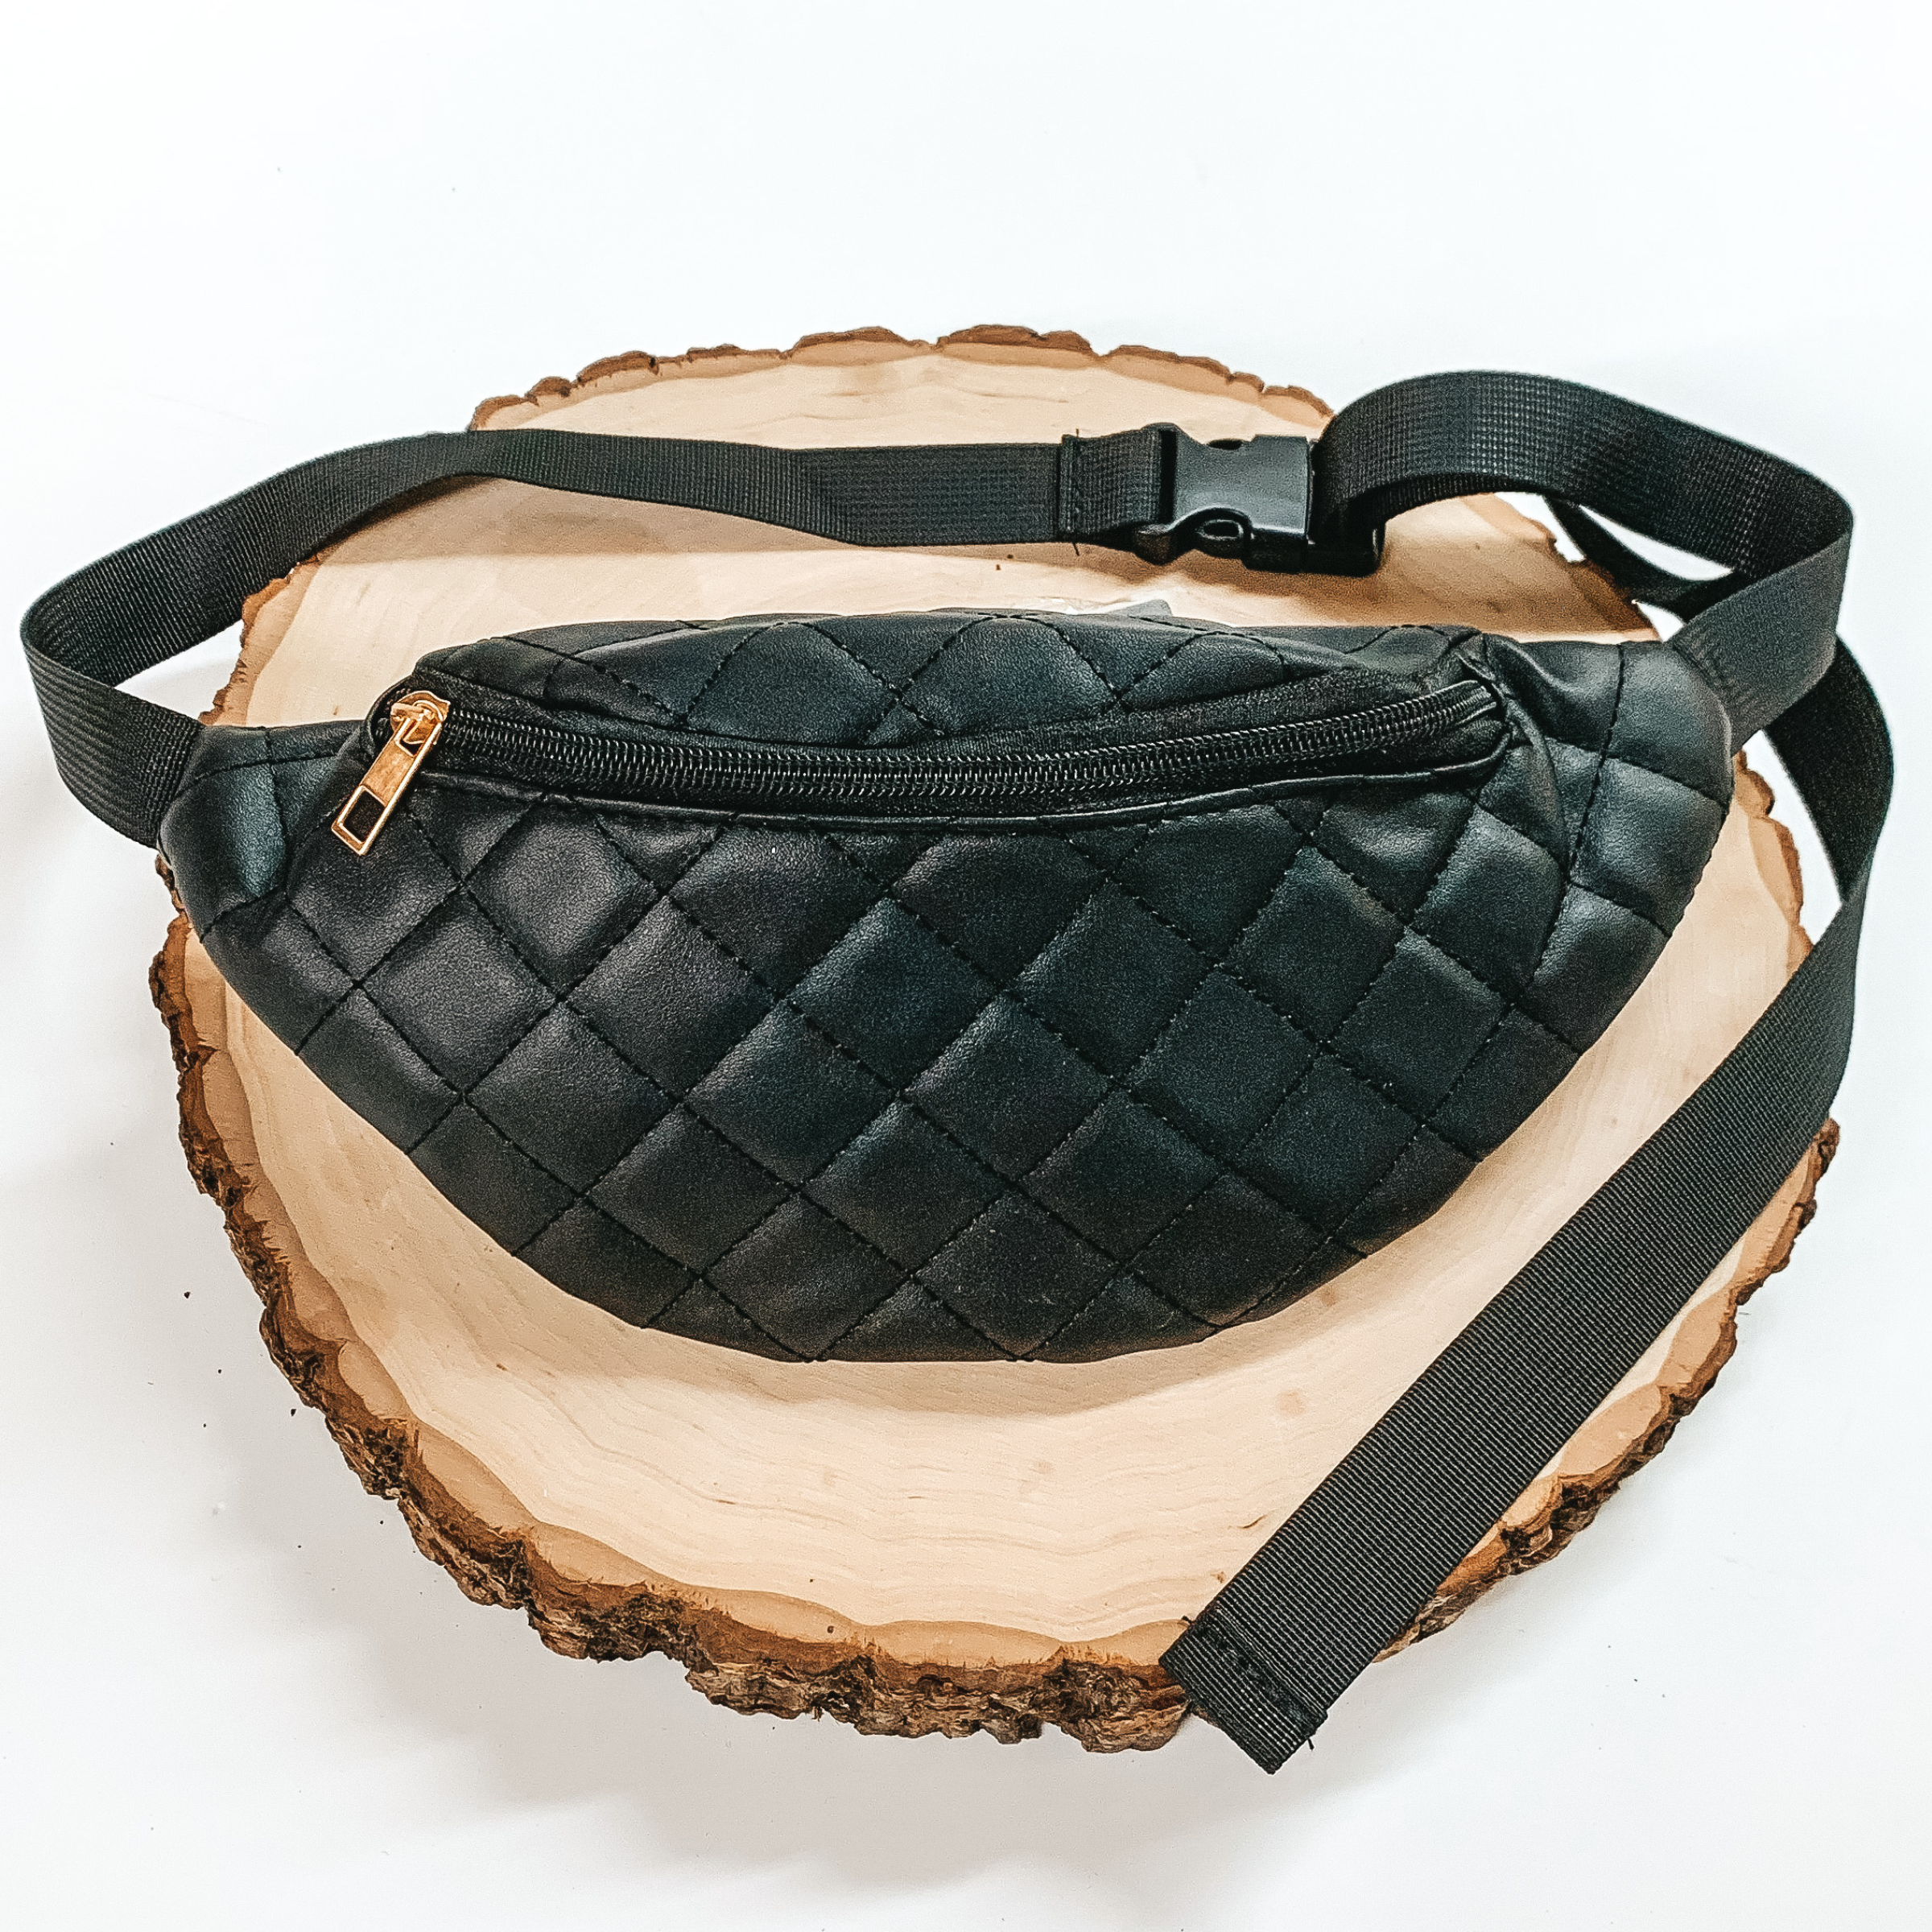 Black, quilted fanny pack with a zipper across the front. This fanny pack also includes black straps and black clips. This fanny pack is pictured on a piece of wood on a white background. 